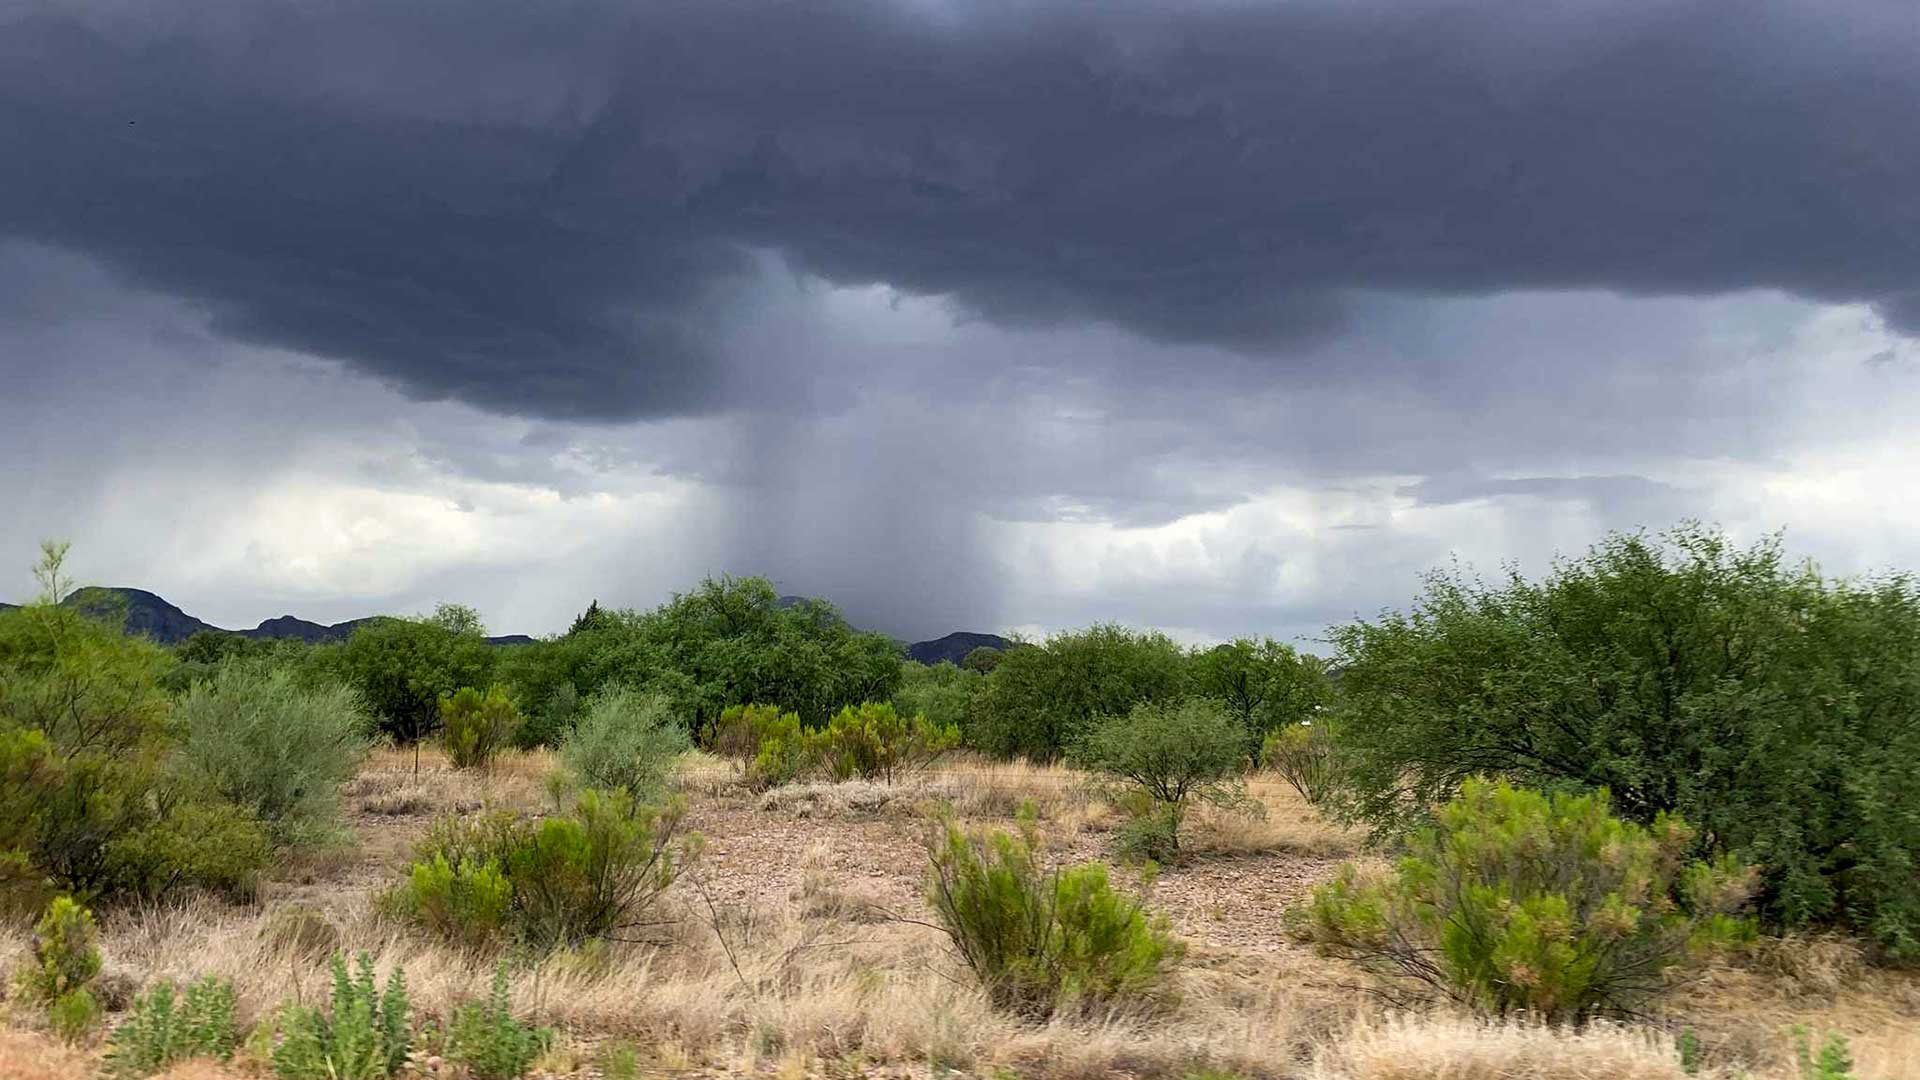 Researchers say the smell of the monsoon is good for your health.